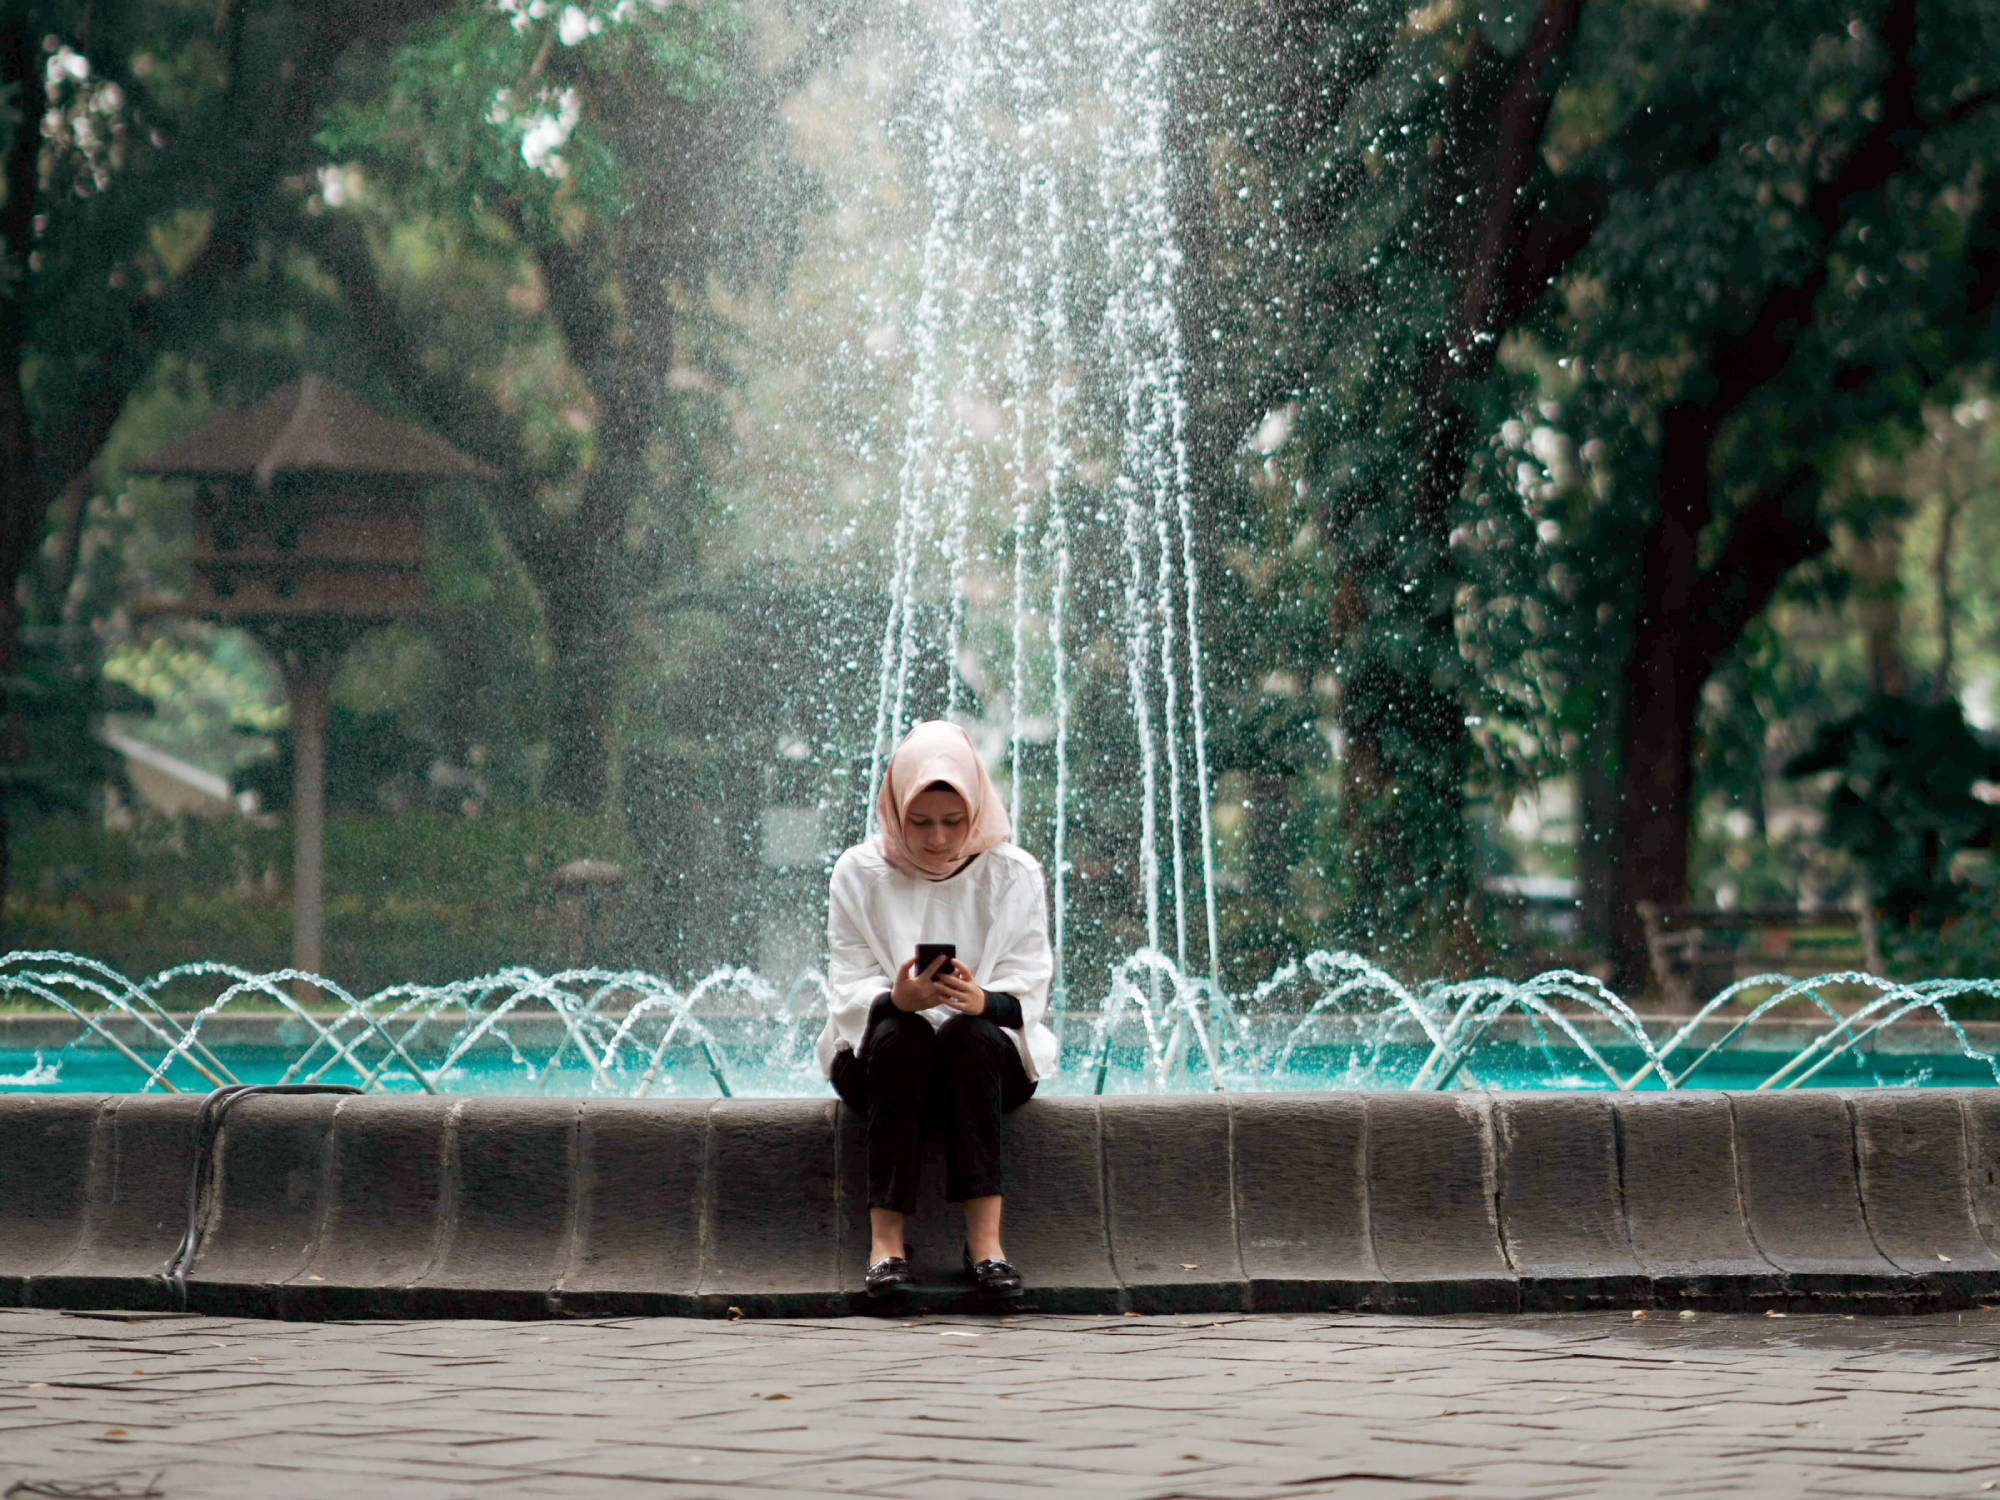 A woman sitting at the edge of an ornate park fountain, looking at a phone.